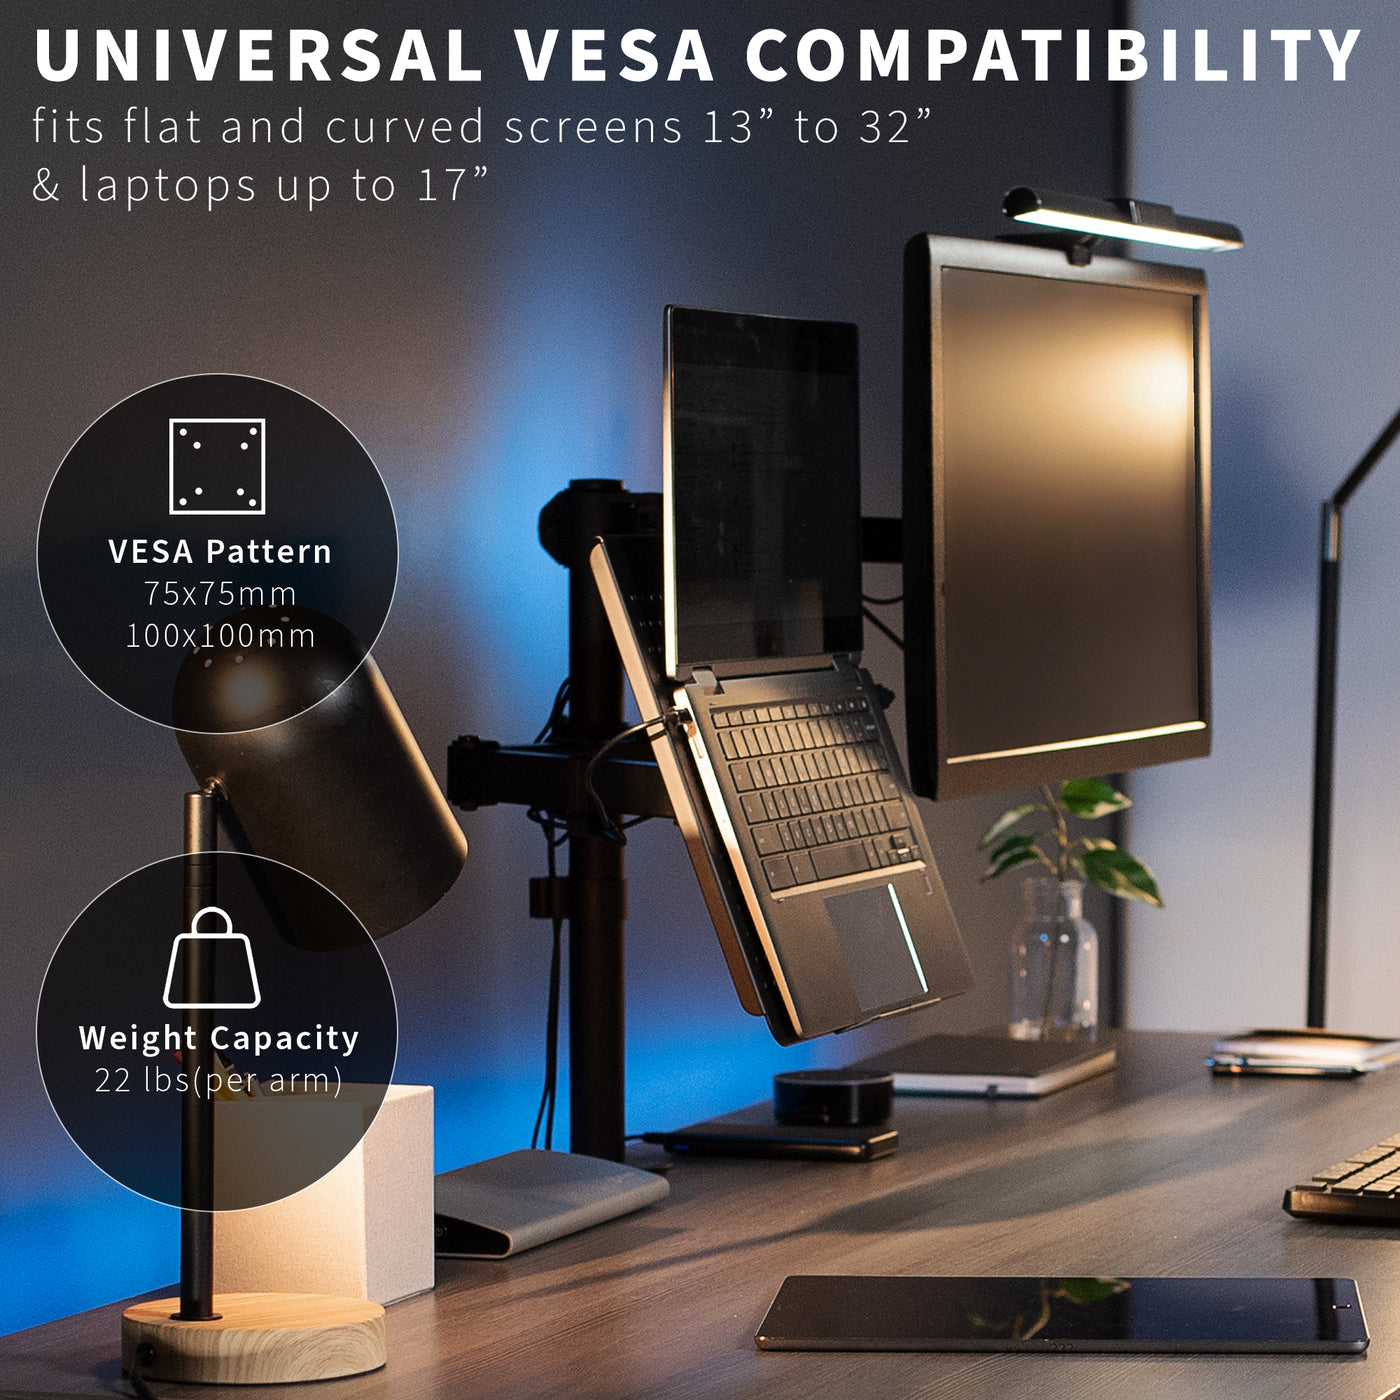 Single Monitor and Laptop Desk Mount – VIVO - desk solutions, screen  mounting, and more